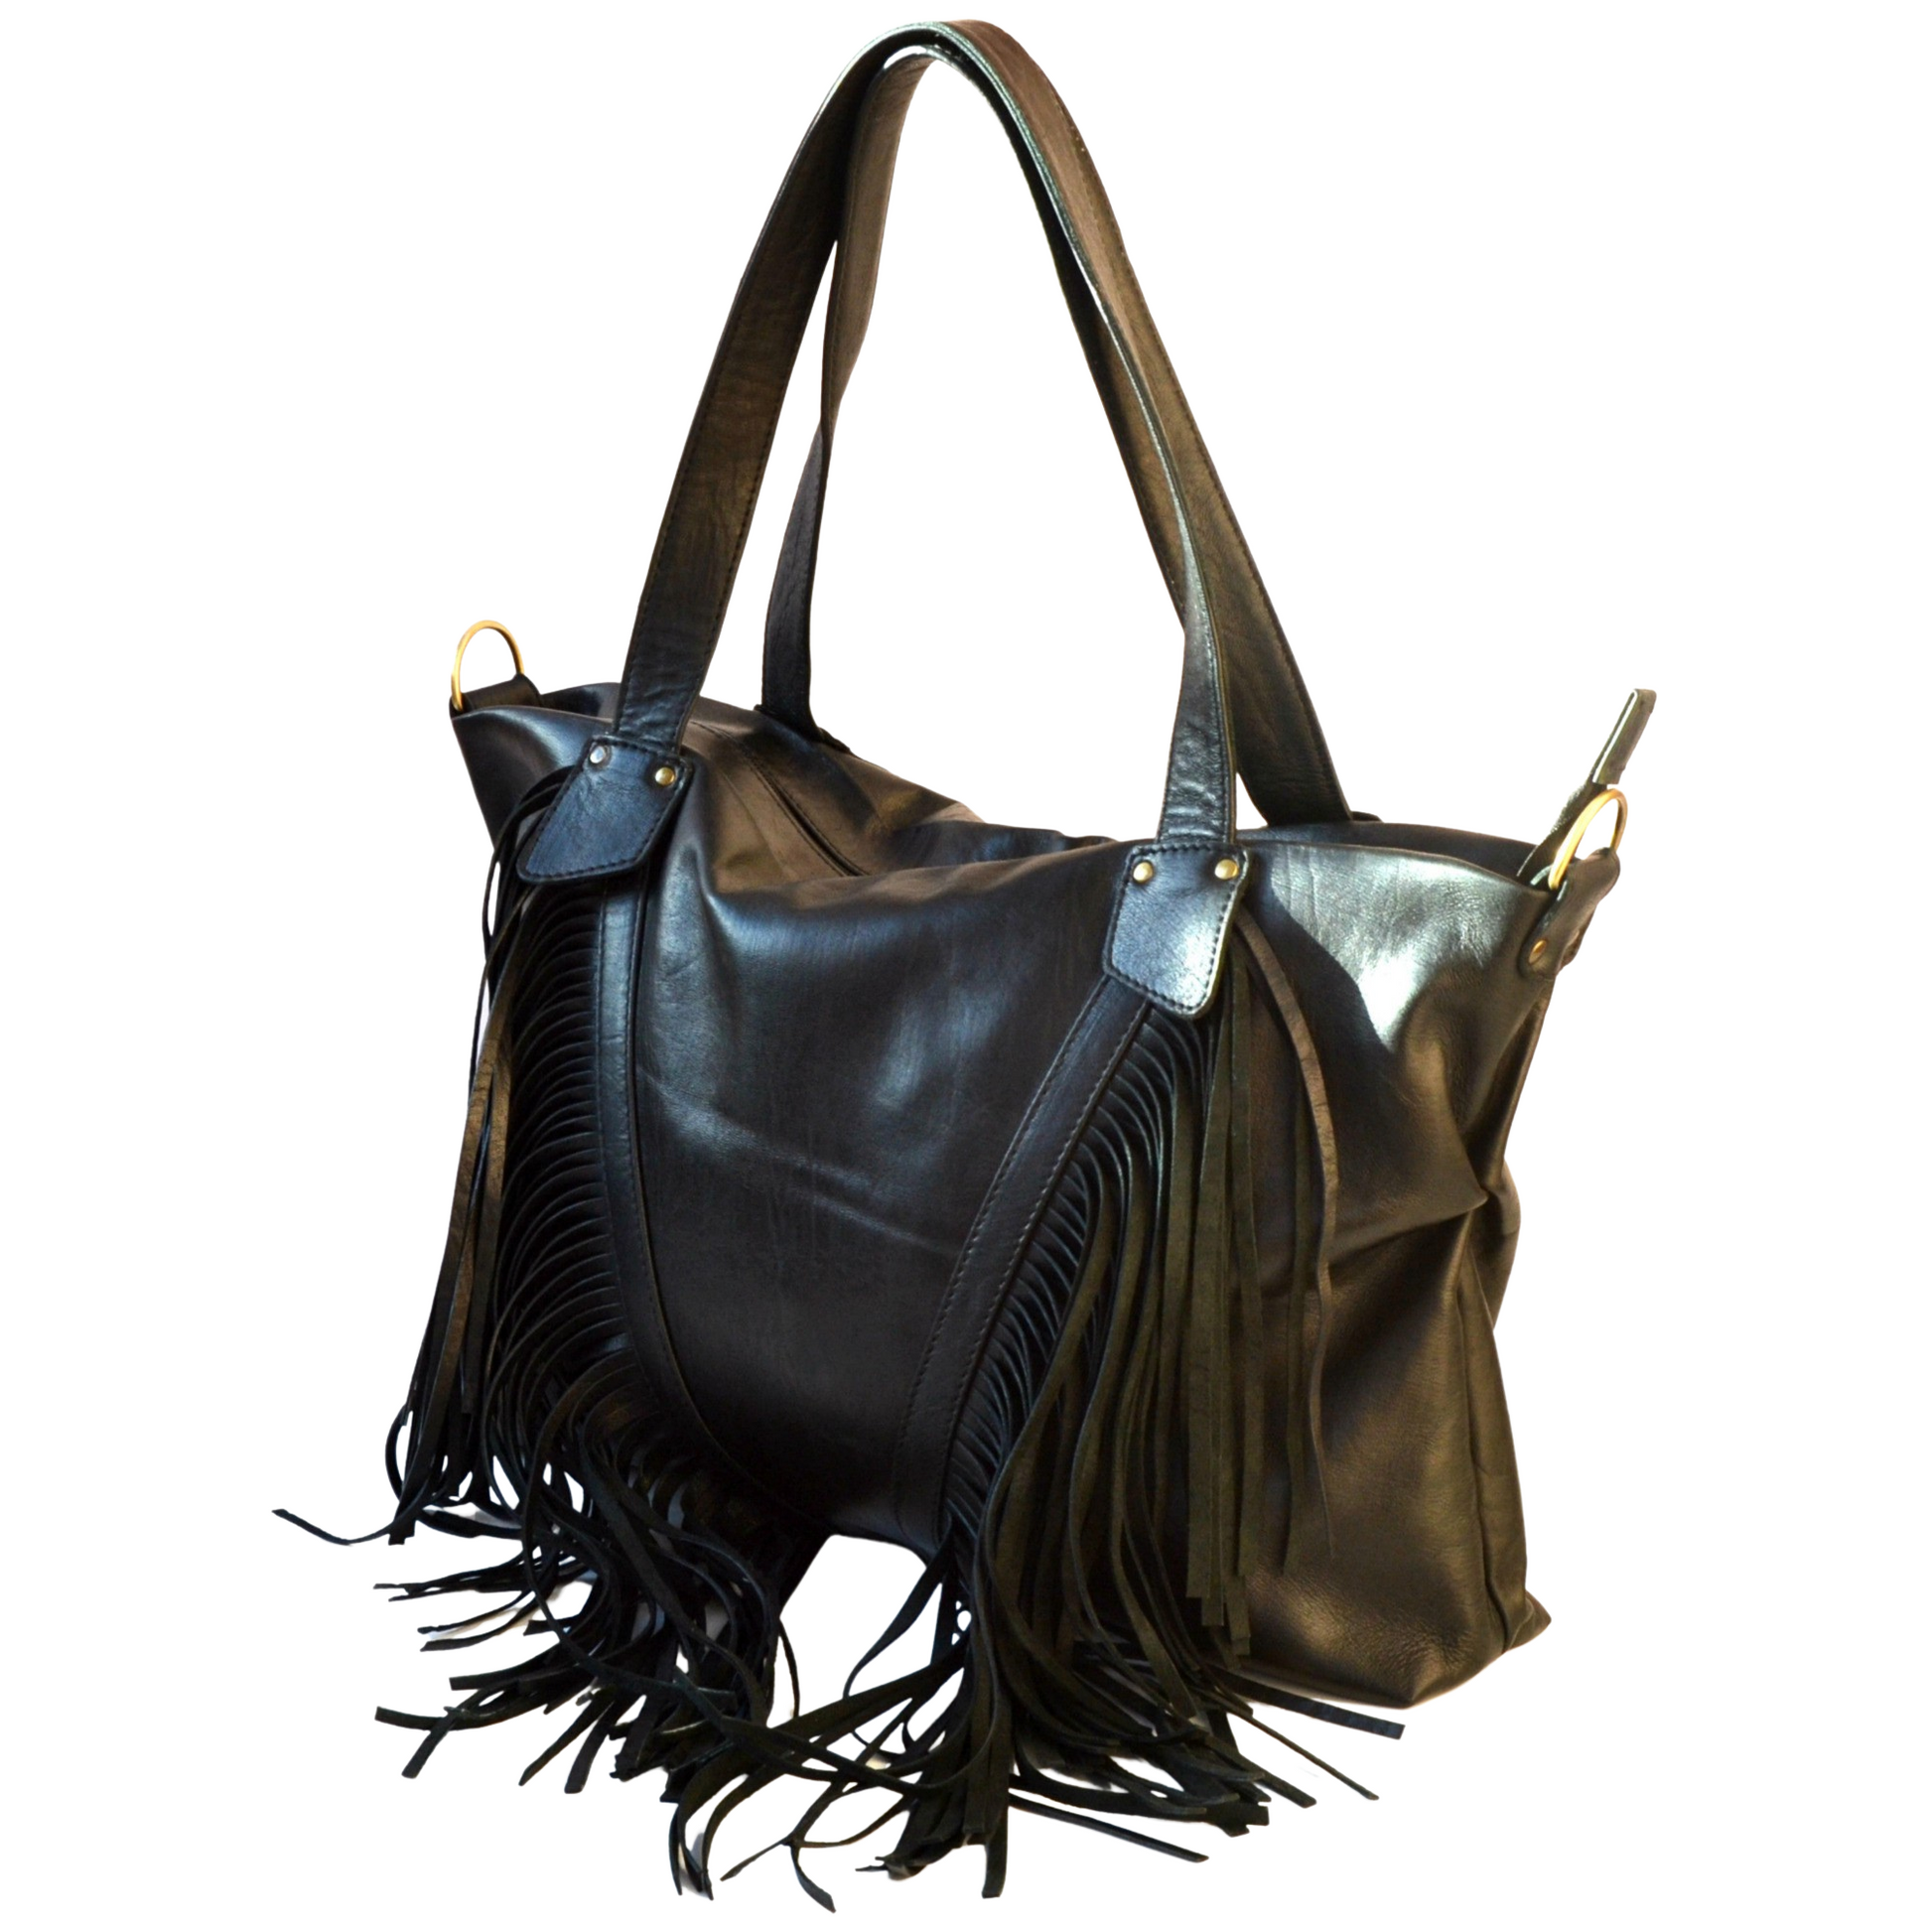 Purchase Wholesale fringe purse. Free Returns & Net 60 Terms on